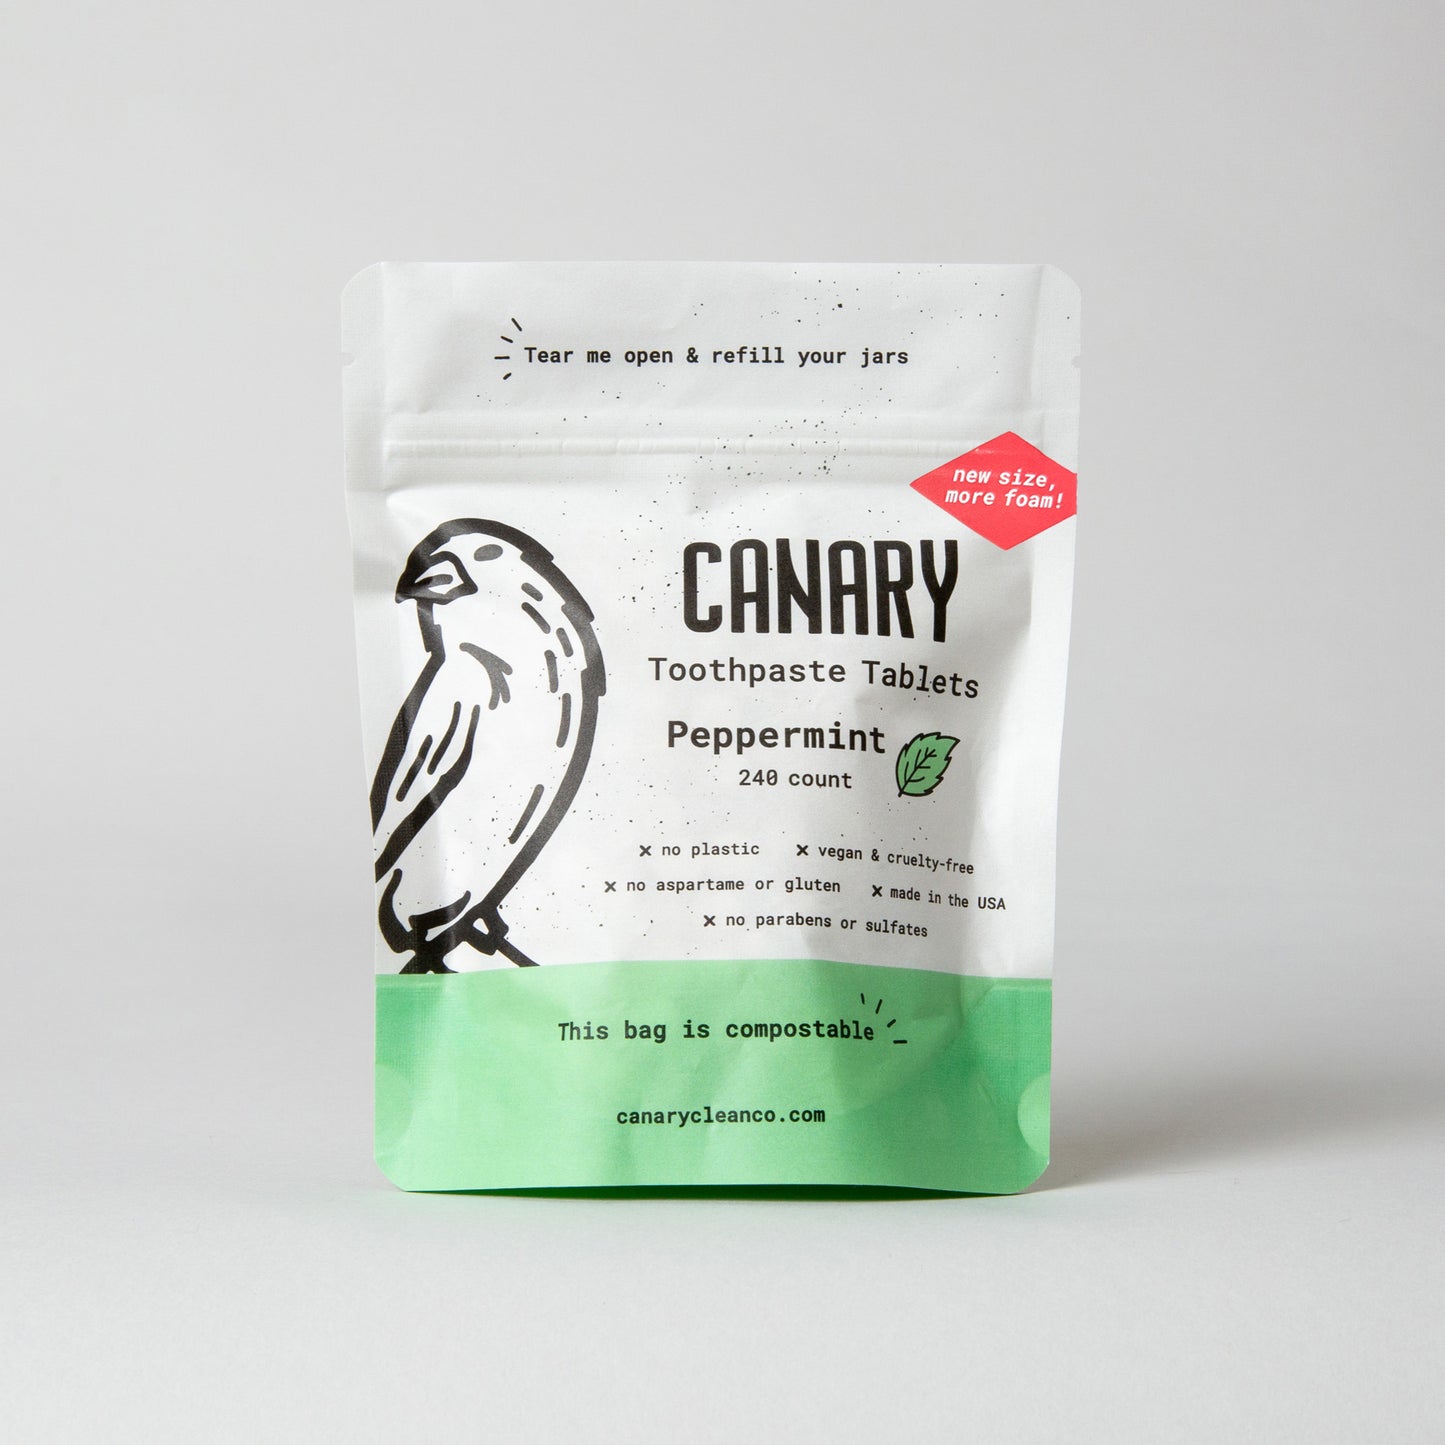 New and improved Canary Peppermint Toothpaste Tablets, front view of new 240ct compostable pouch